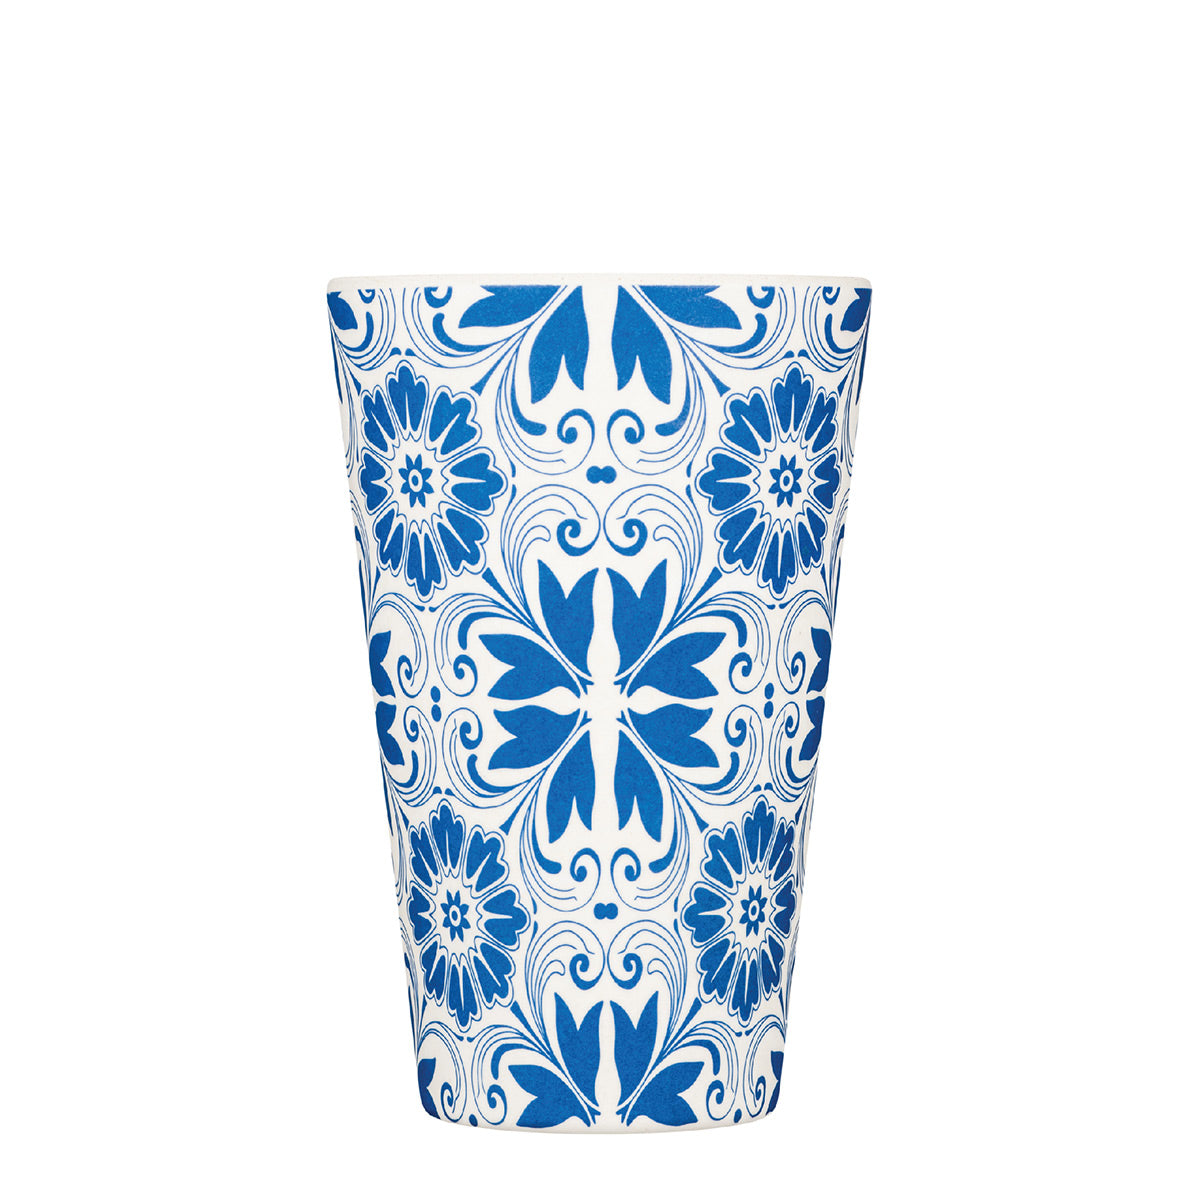 Ecoffee Cup 14oz Delft Touch